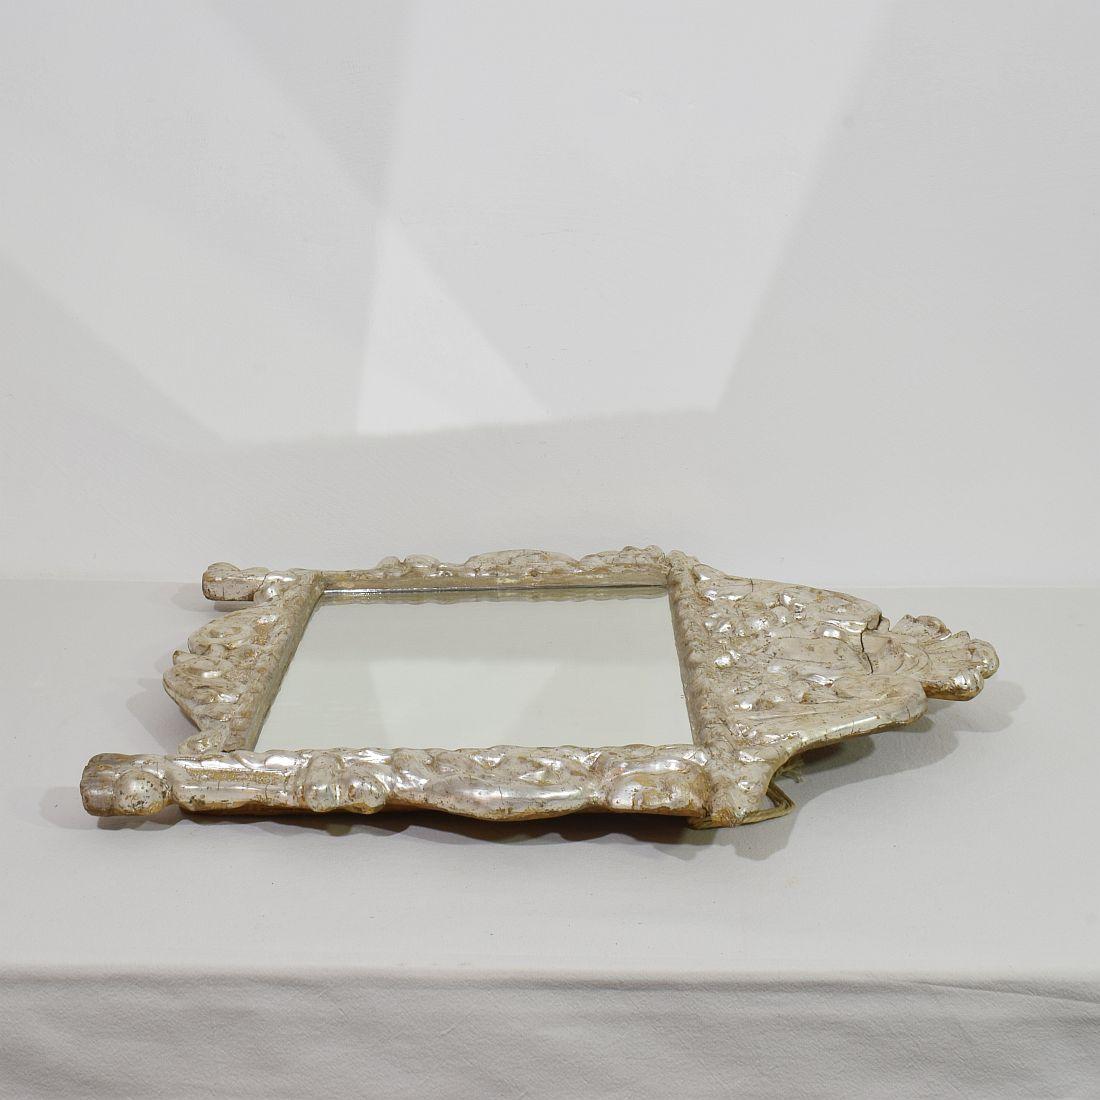 Italian 17th/ 18th Century Baroque Carved Wooden Silverleaf Mirror With Angels For Sale 10